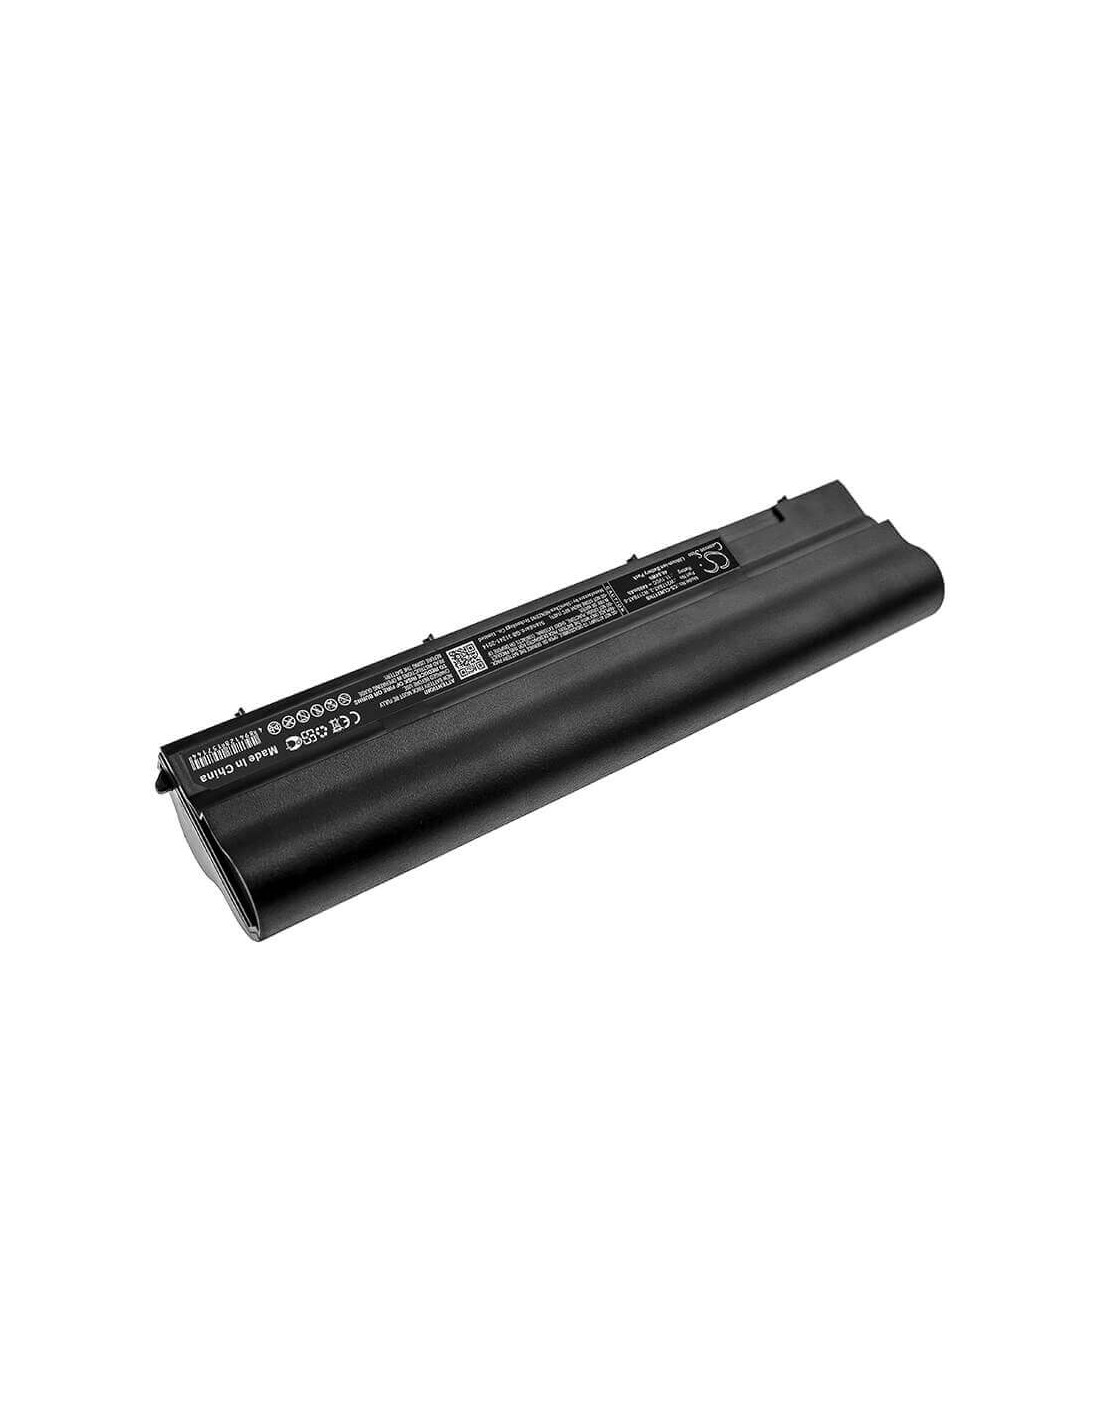 Battery for Clevo, W217, W217cu 11.1V, 4400mAh - 48.84Wh